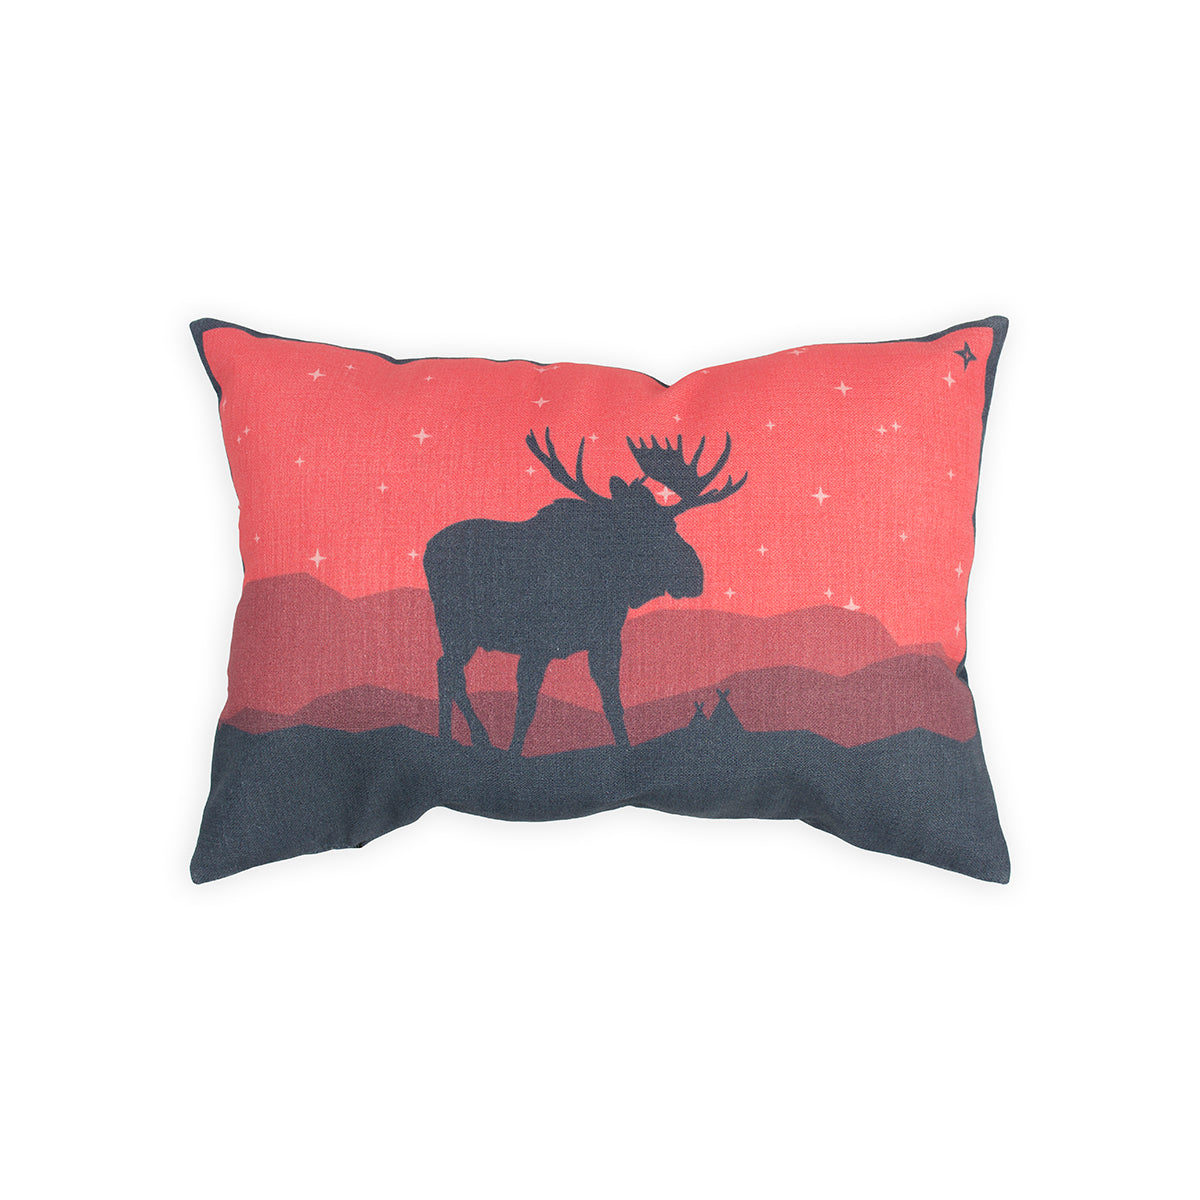 14" x 20" 100% cotton pillow cover featuring a red starry night background and moose silhouette in black